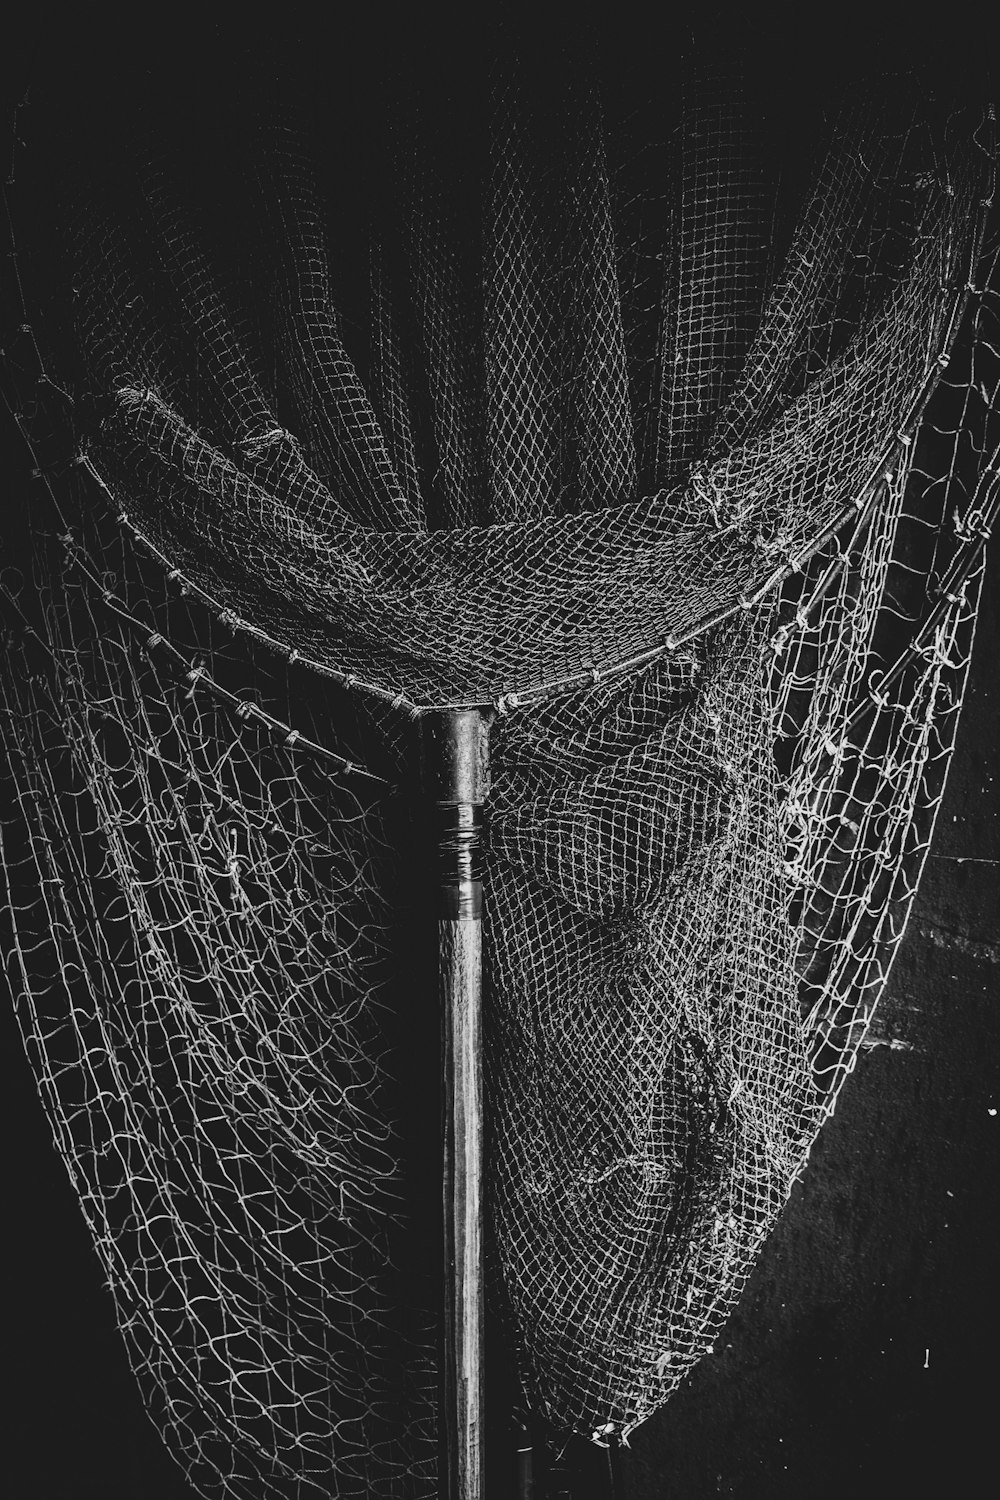 black and white photo of a net